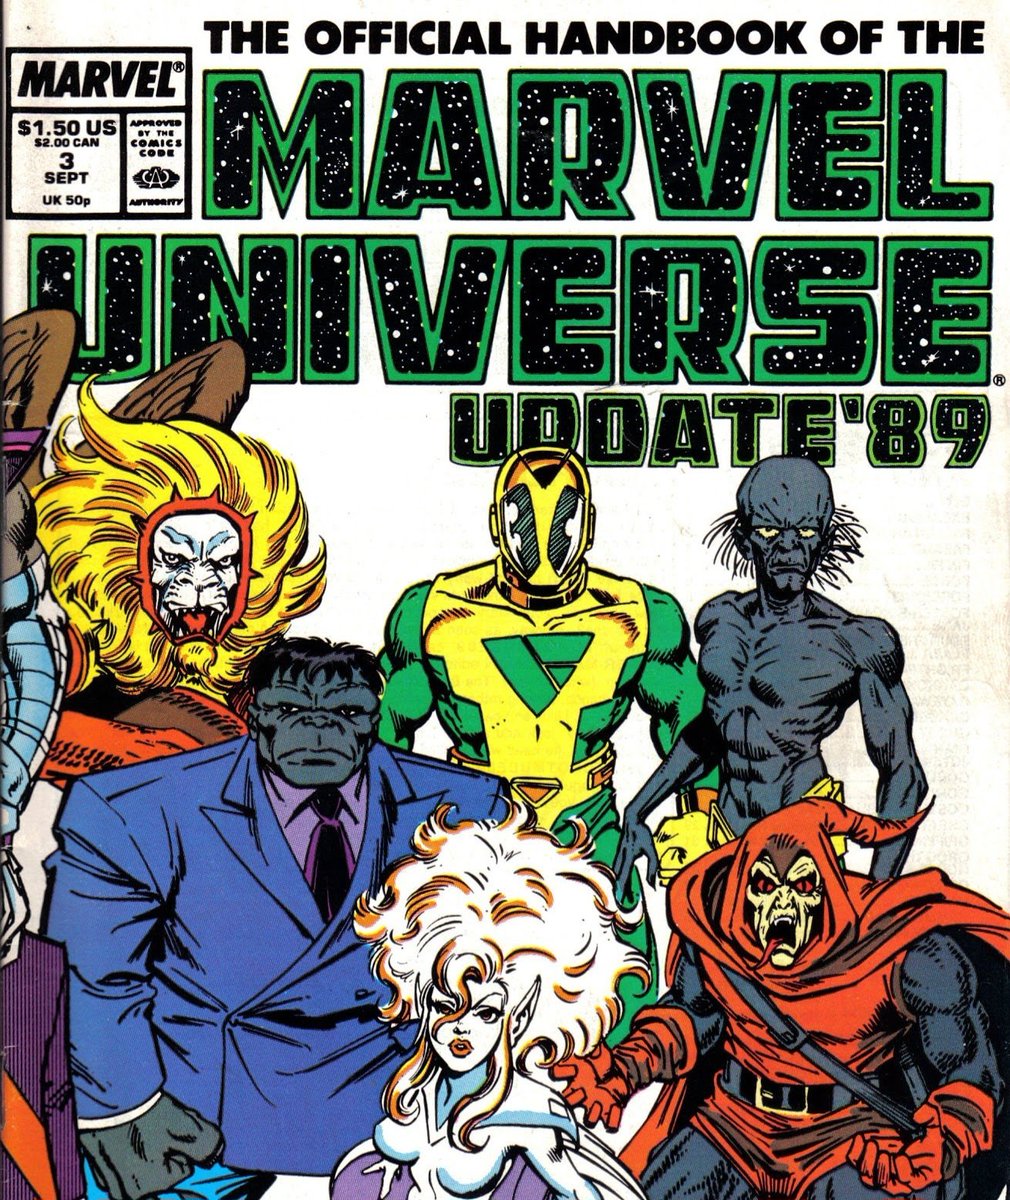 Hi there Comic Fans, check out my short clip featuring the wraparound cover to The Official Handbook of the Marvel Universe Update 89 # 3 by clicking on the link below:
youtu.be/Vz7zKlSwLGg
#thecosmiccomicbookbroadcast 
#comicbookbroadcaster #marvelcomics #marveluniverse